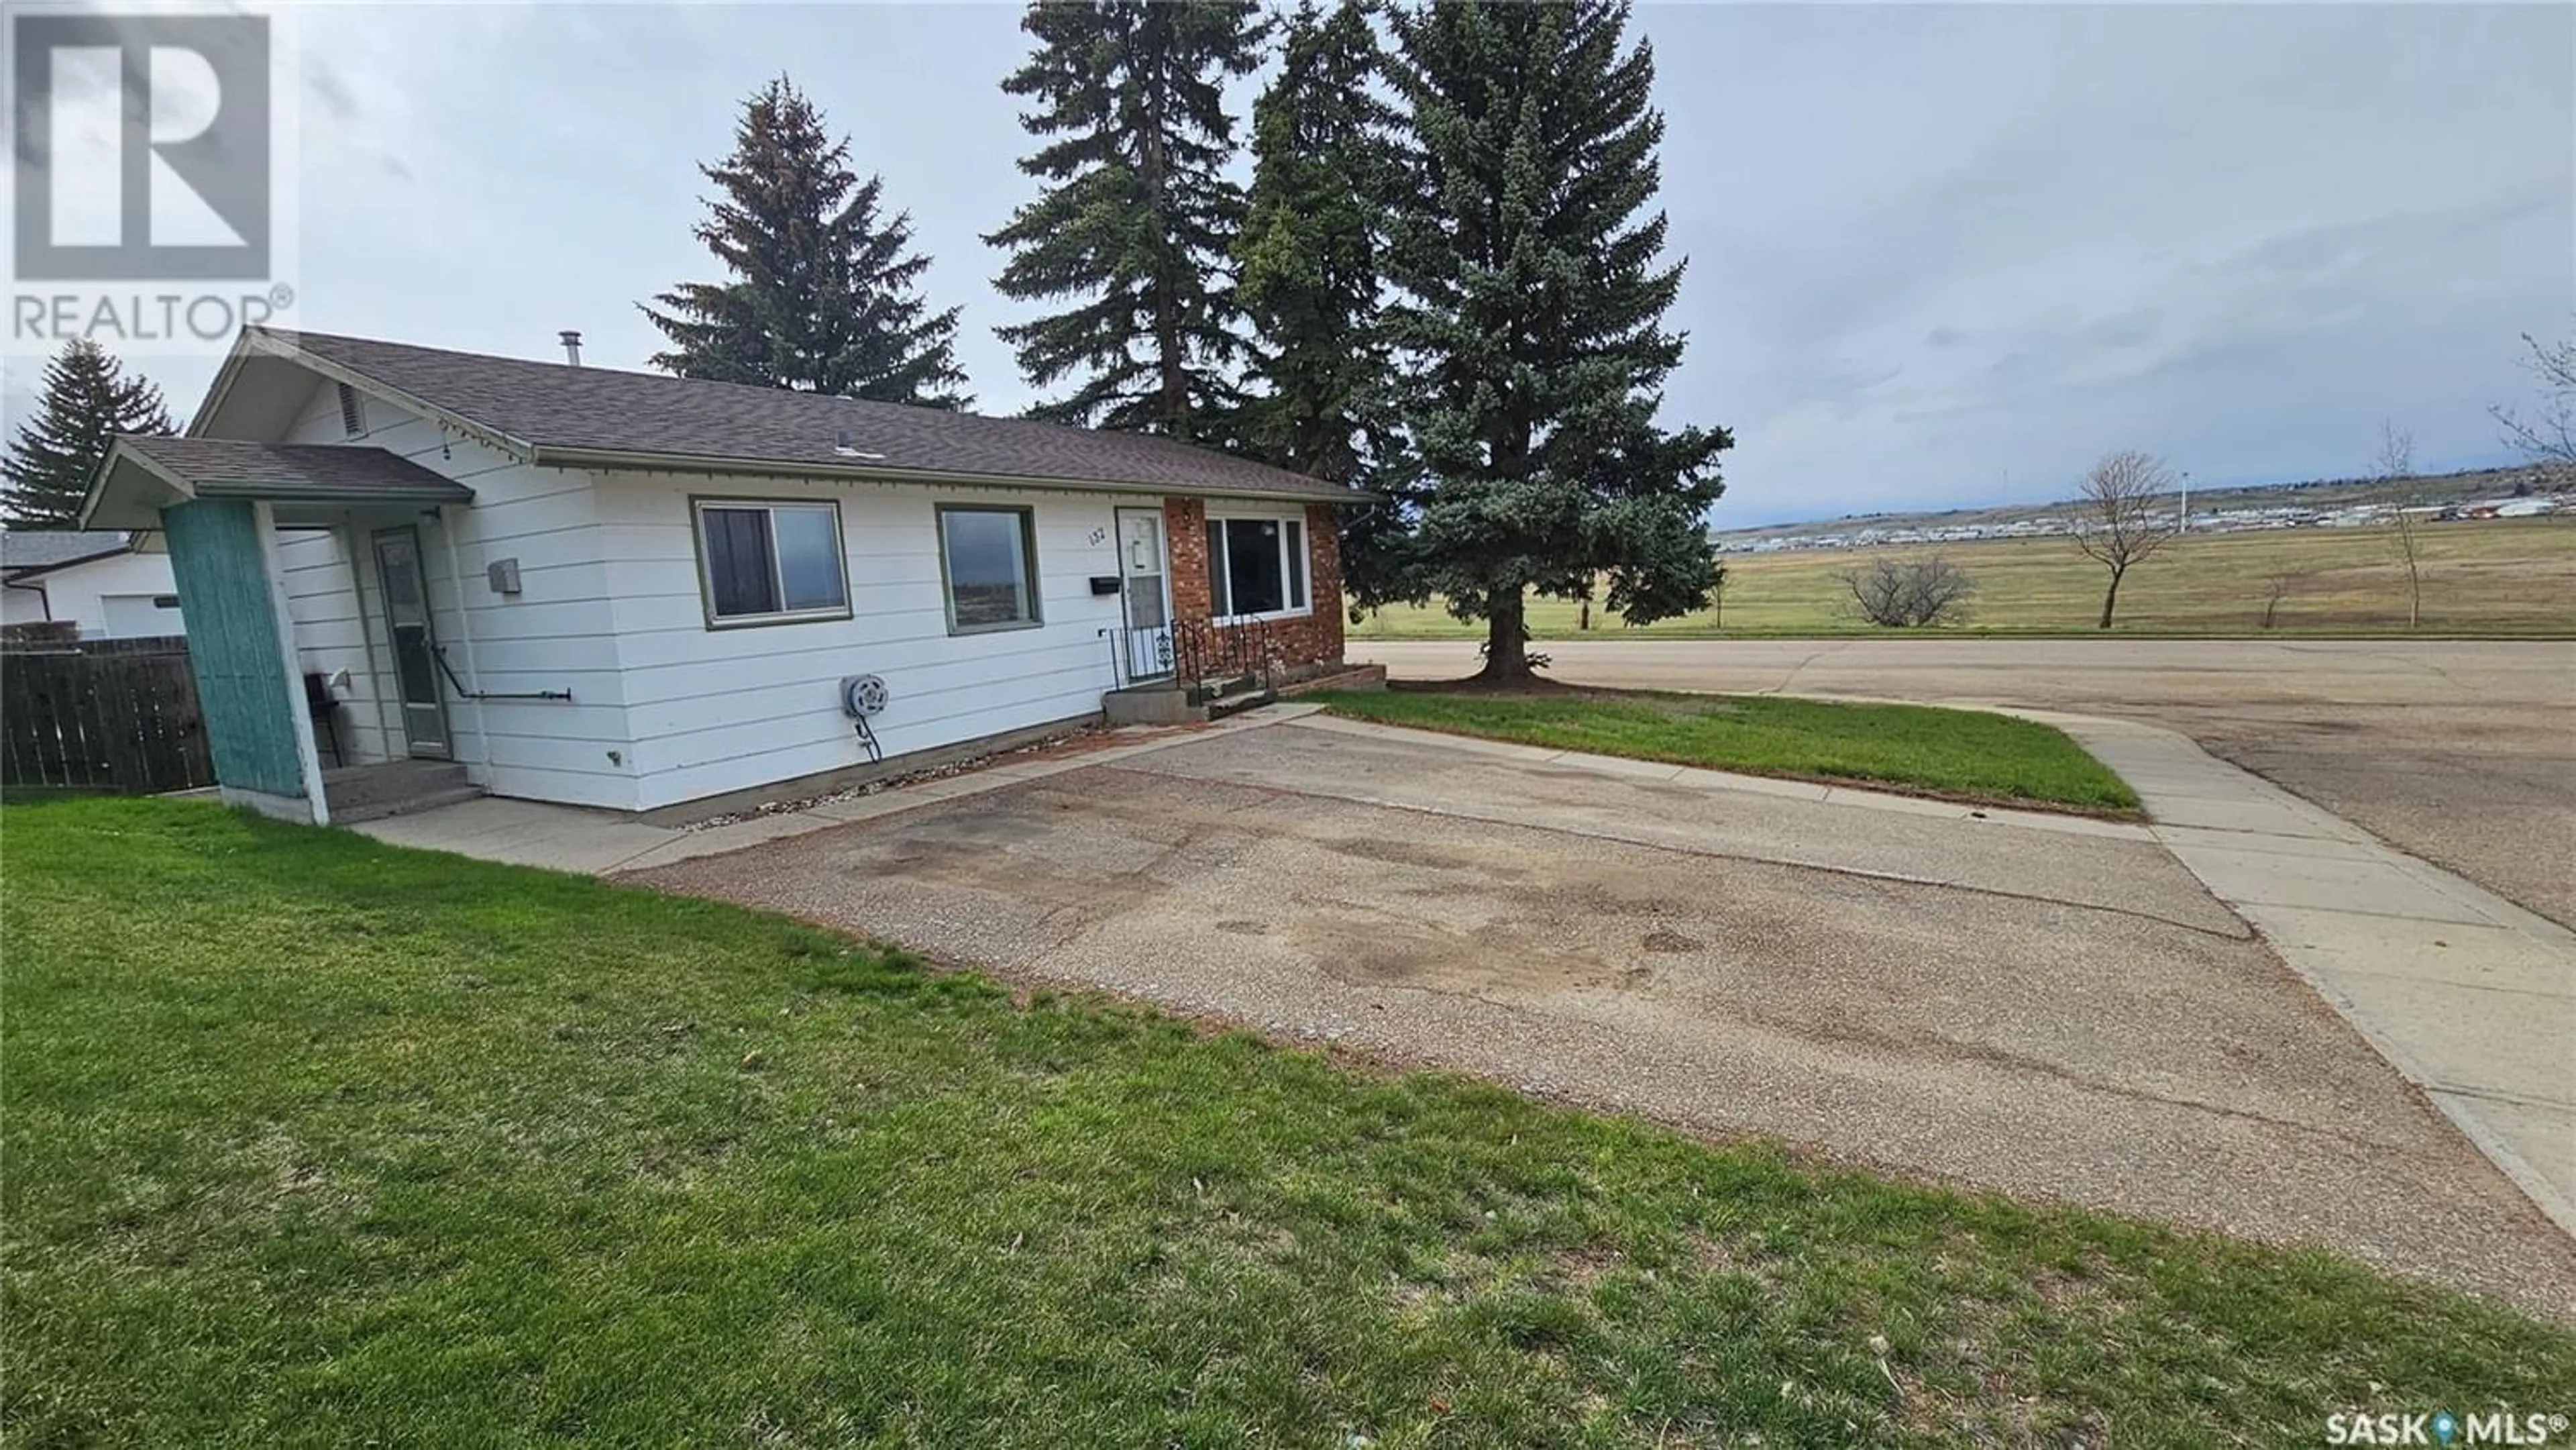 Frontside or backside of a home for 132 Haw PLACE, Swift Current Saskatchewan S9H4B7